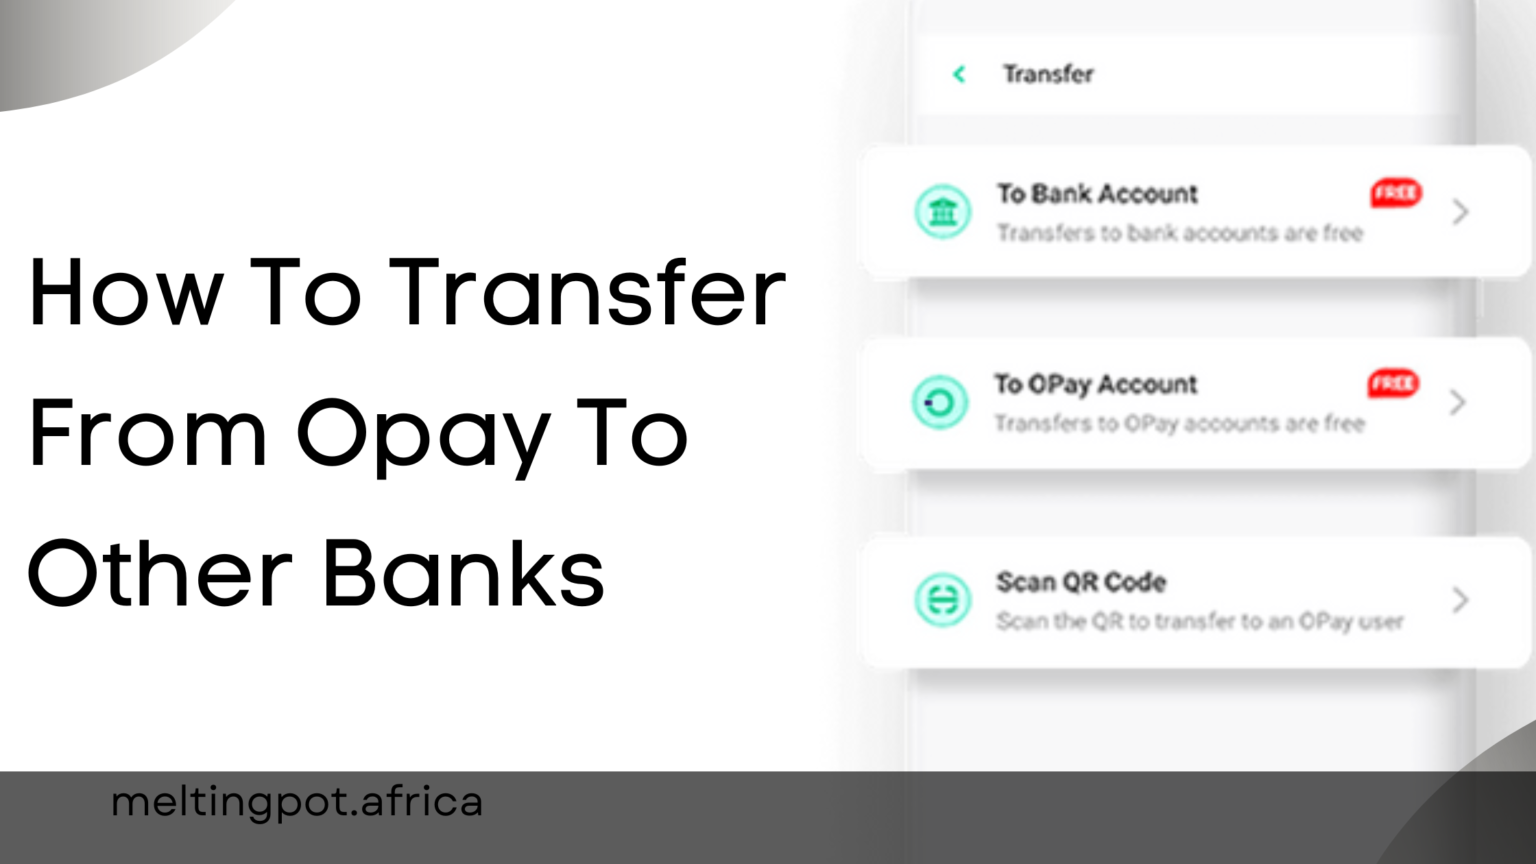 How To Transfer From Opay To Other Banks